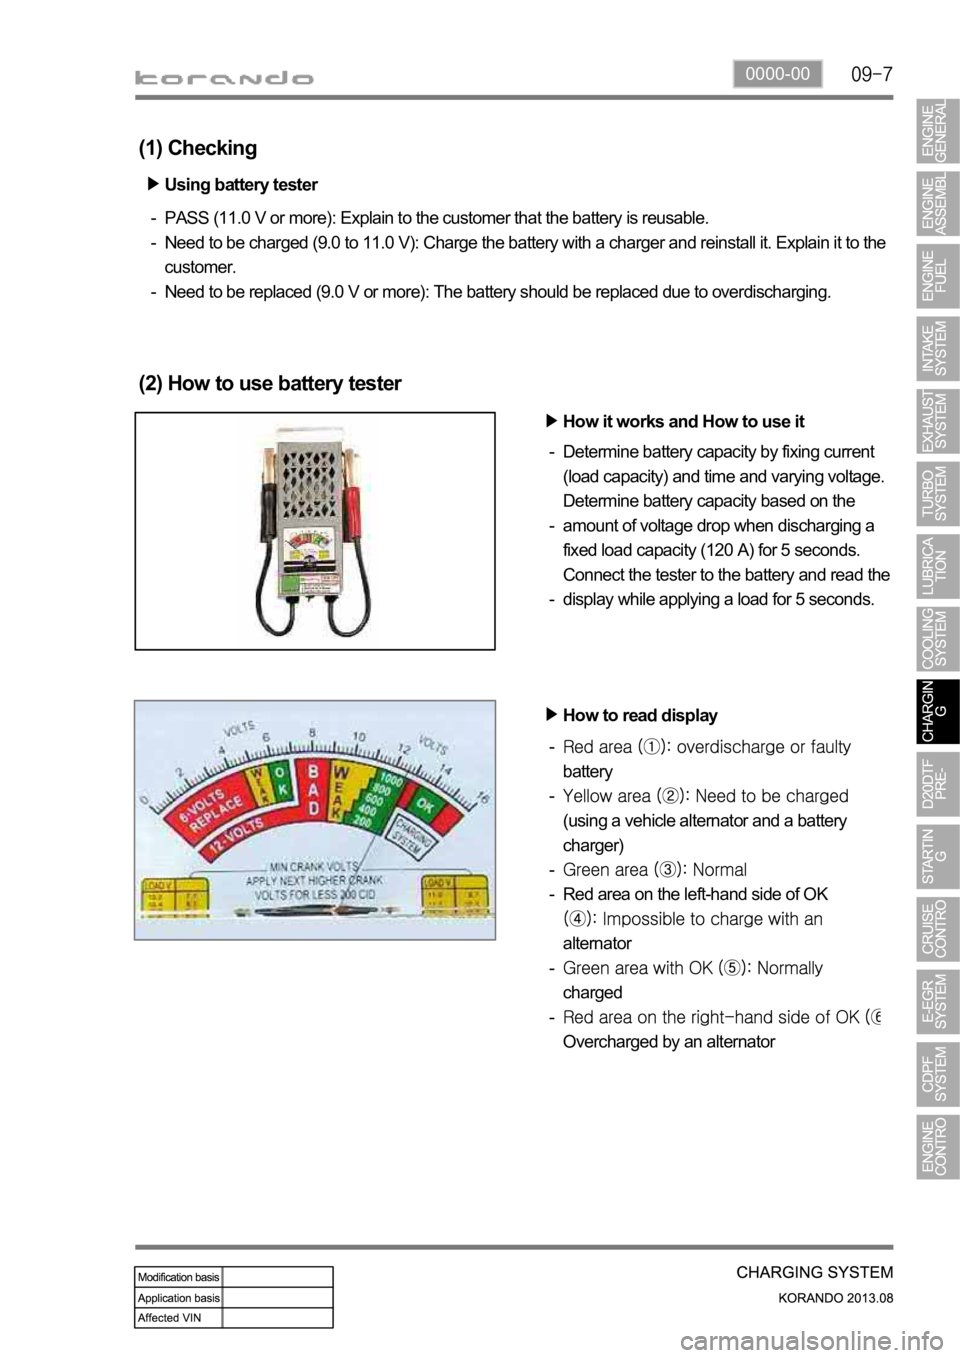 SSANGYONG KORANDO 2013  Service Manual 0000-00
(1) Checking
Using battery tester
PASS (11.0 V or more): Explain to the customer that the battery is reusable.
Need to be charged (9.0 to 11.0 V): Charge the battery with a charger and reinsta